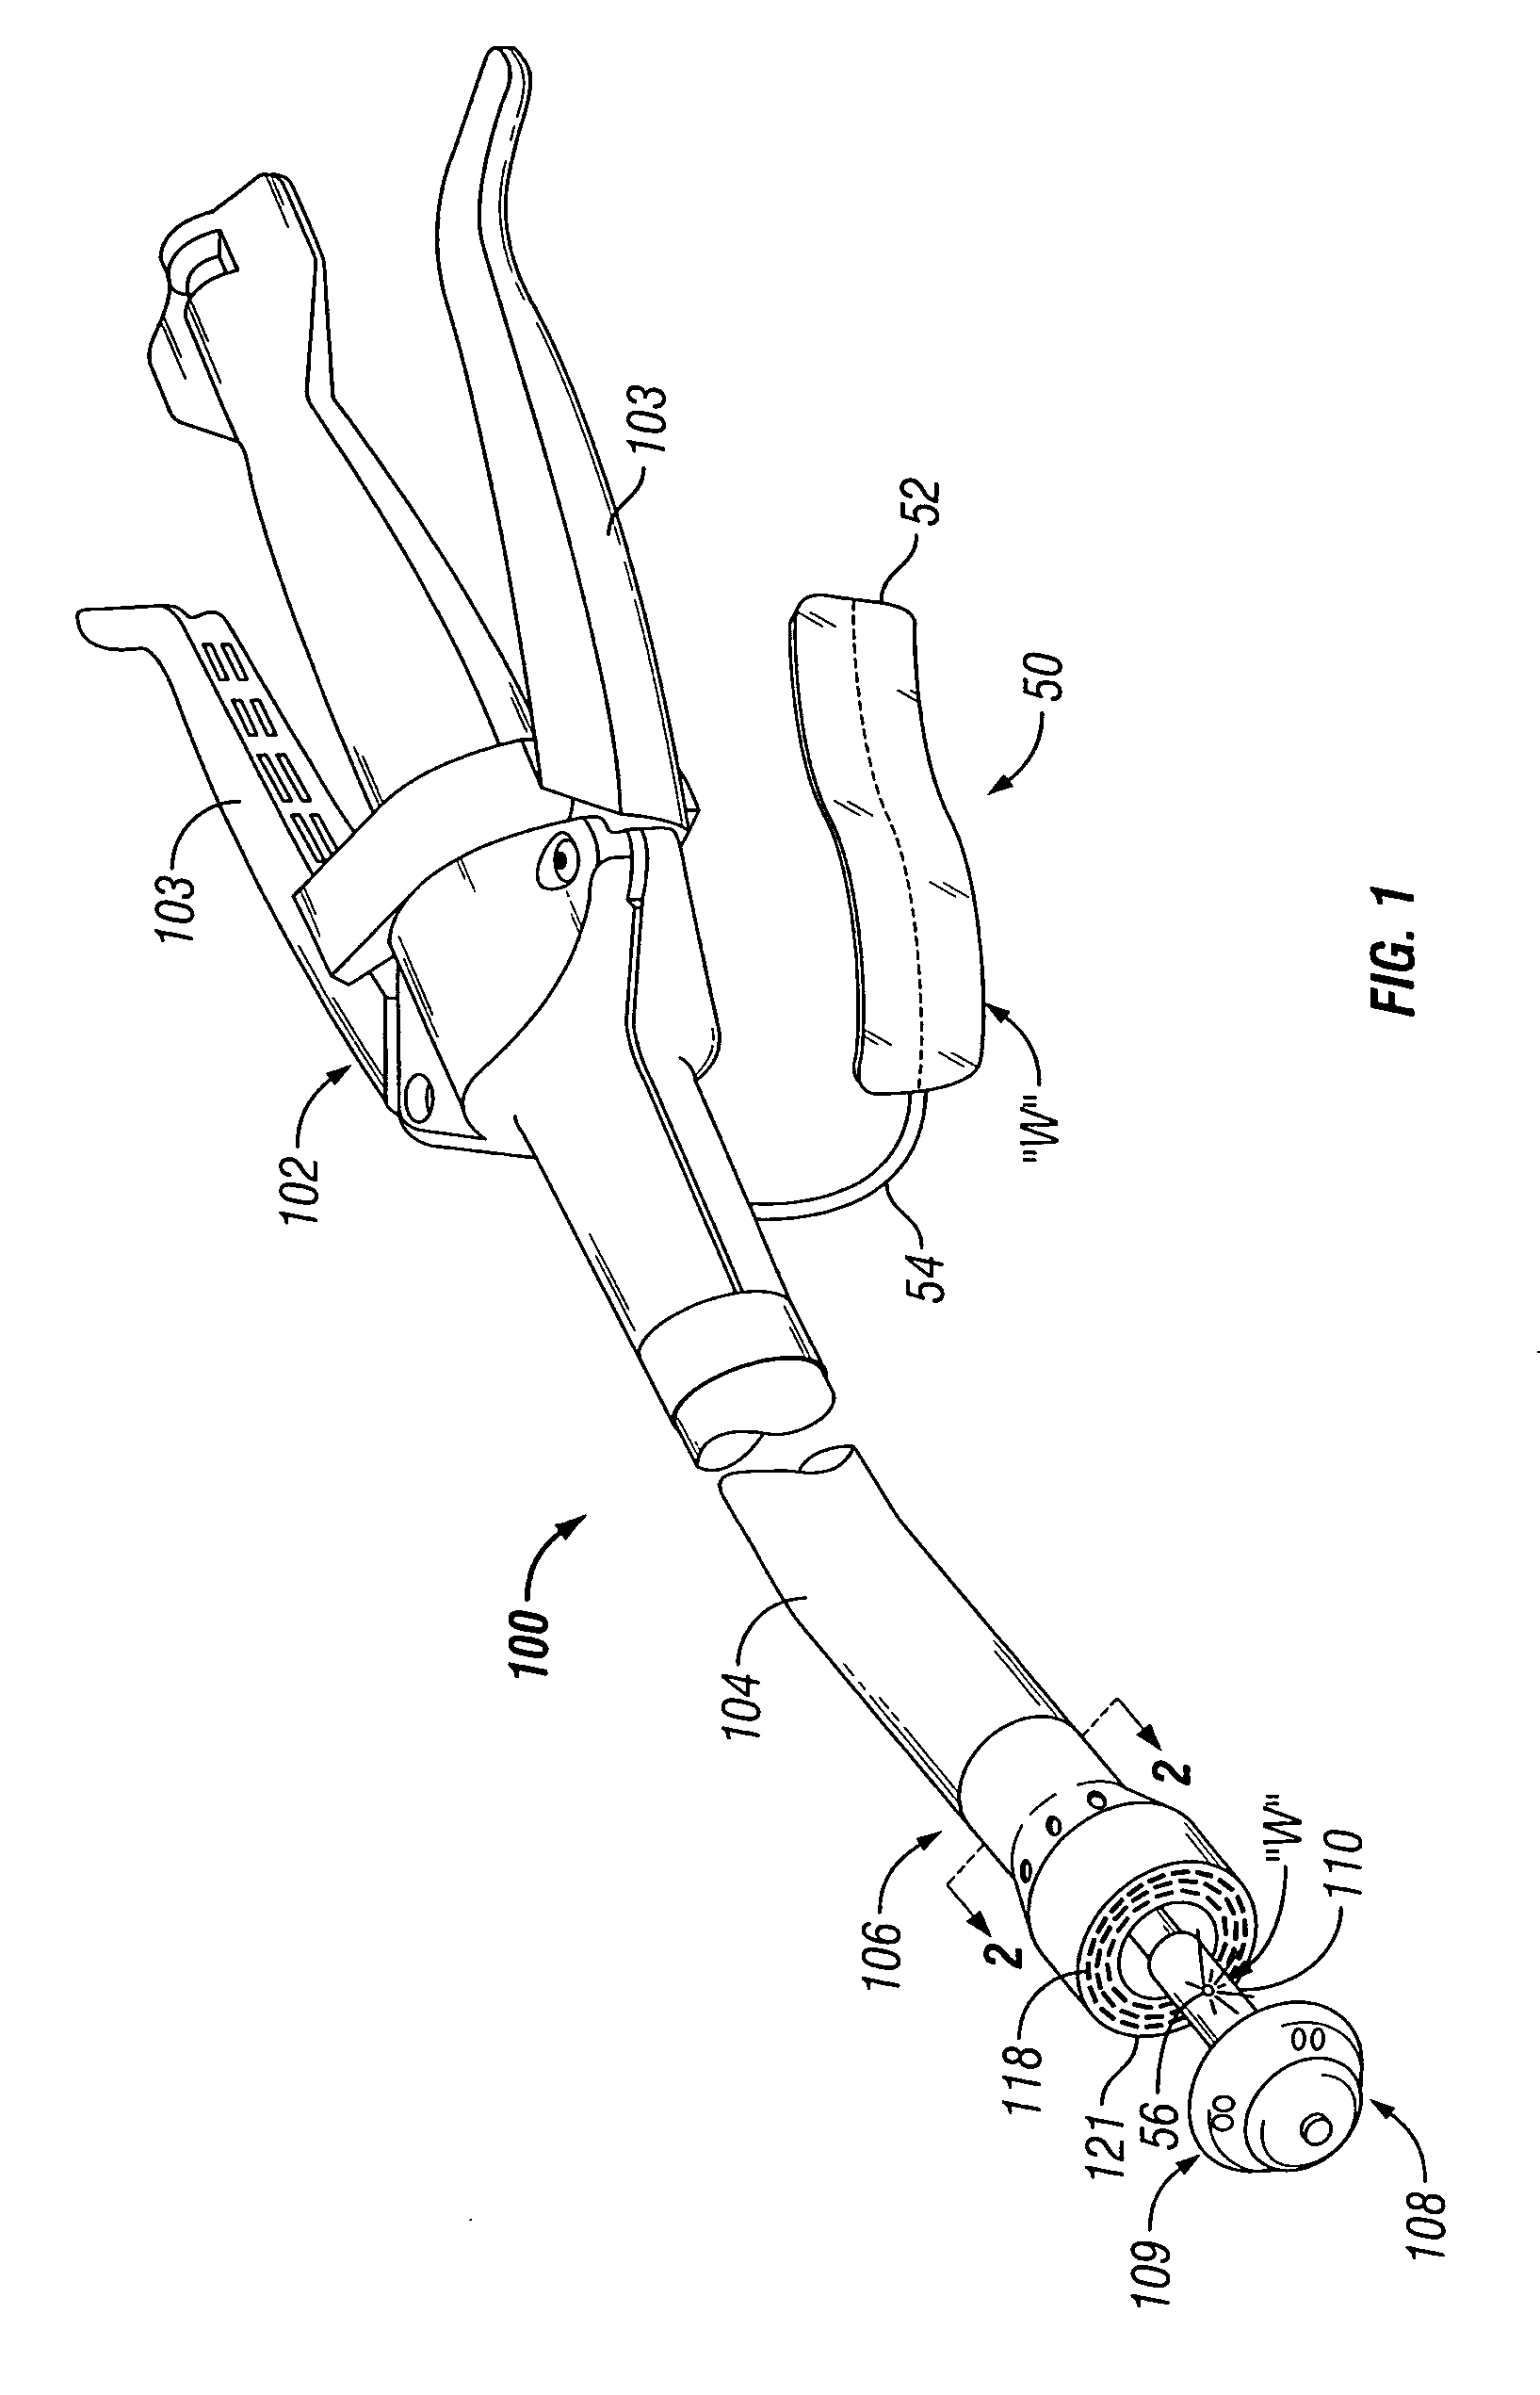 Surgical stapling instruments including a cartridge having multiple staple sizes